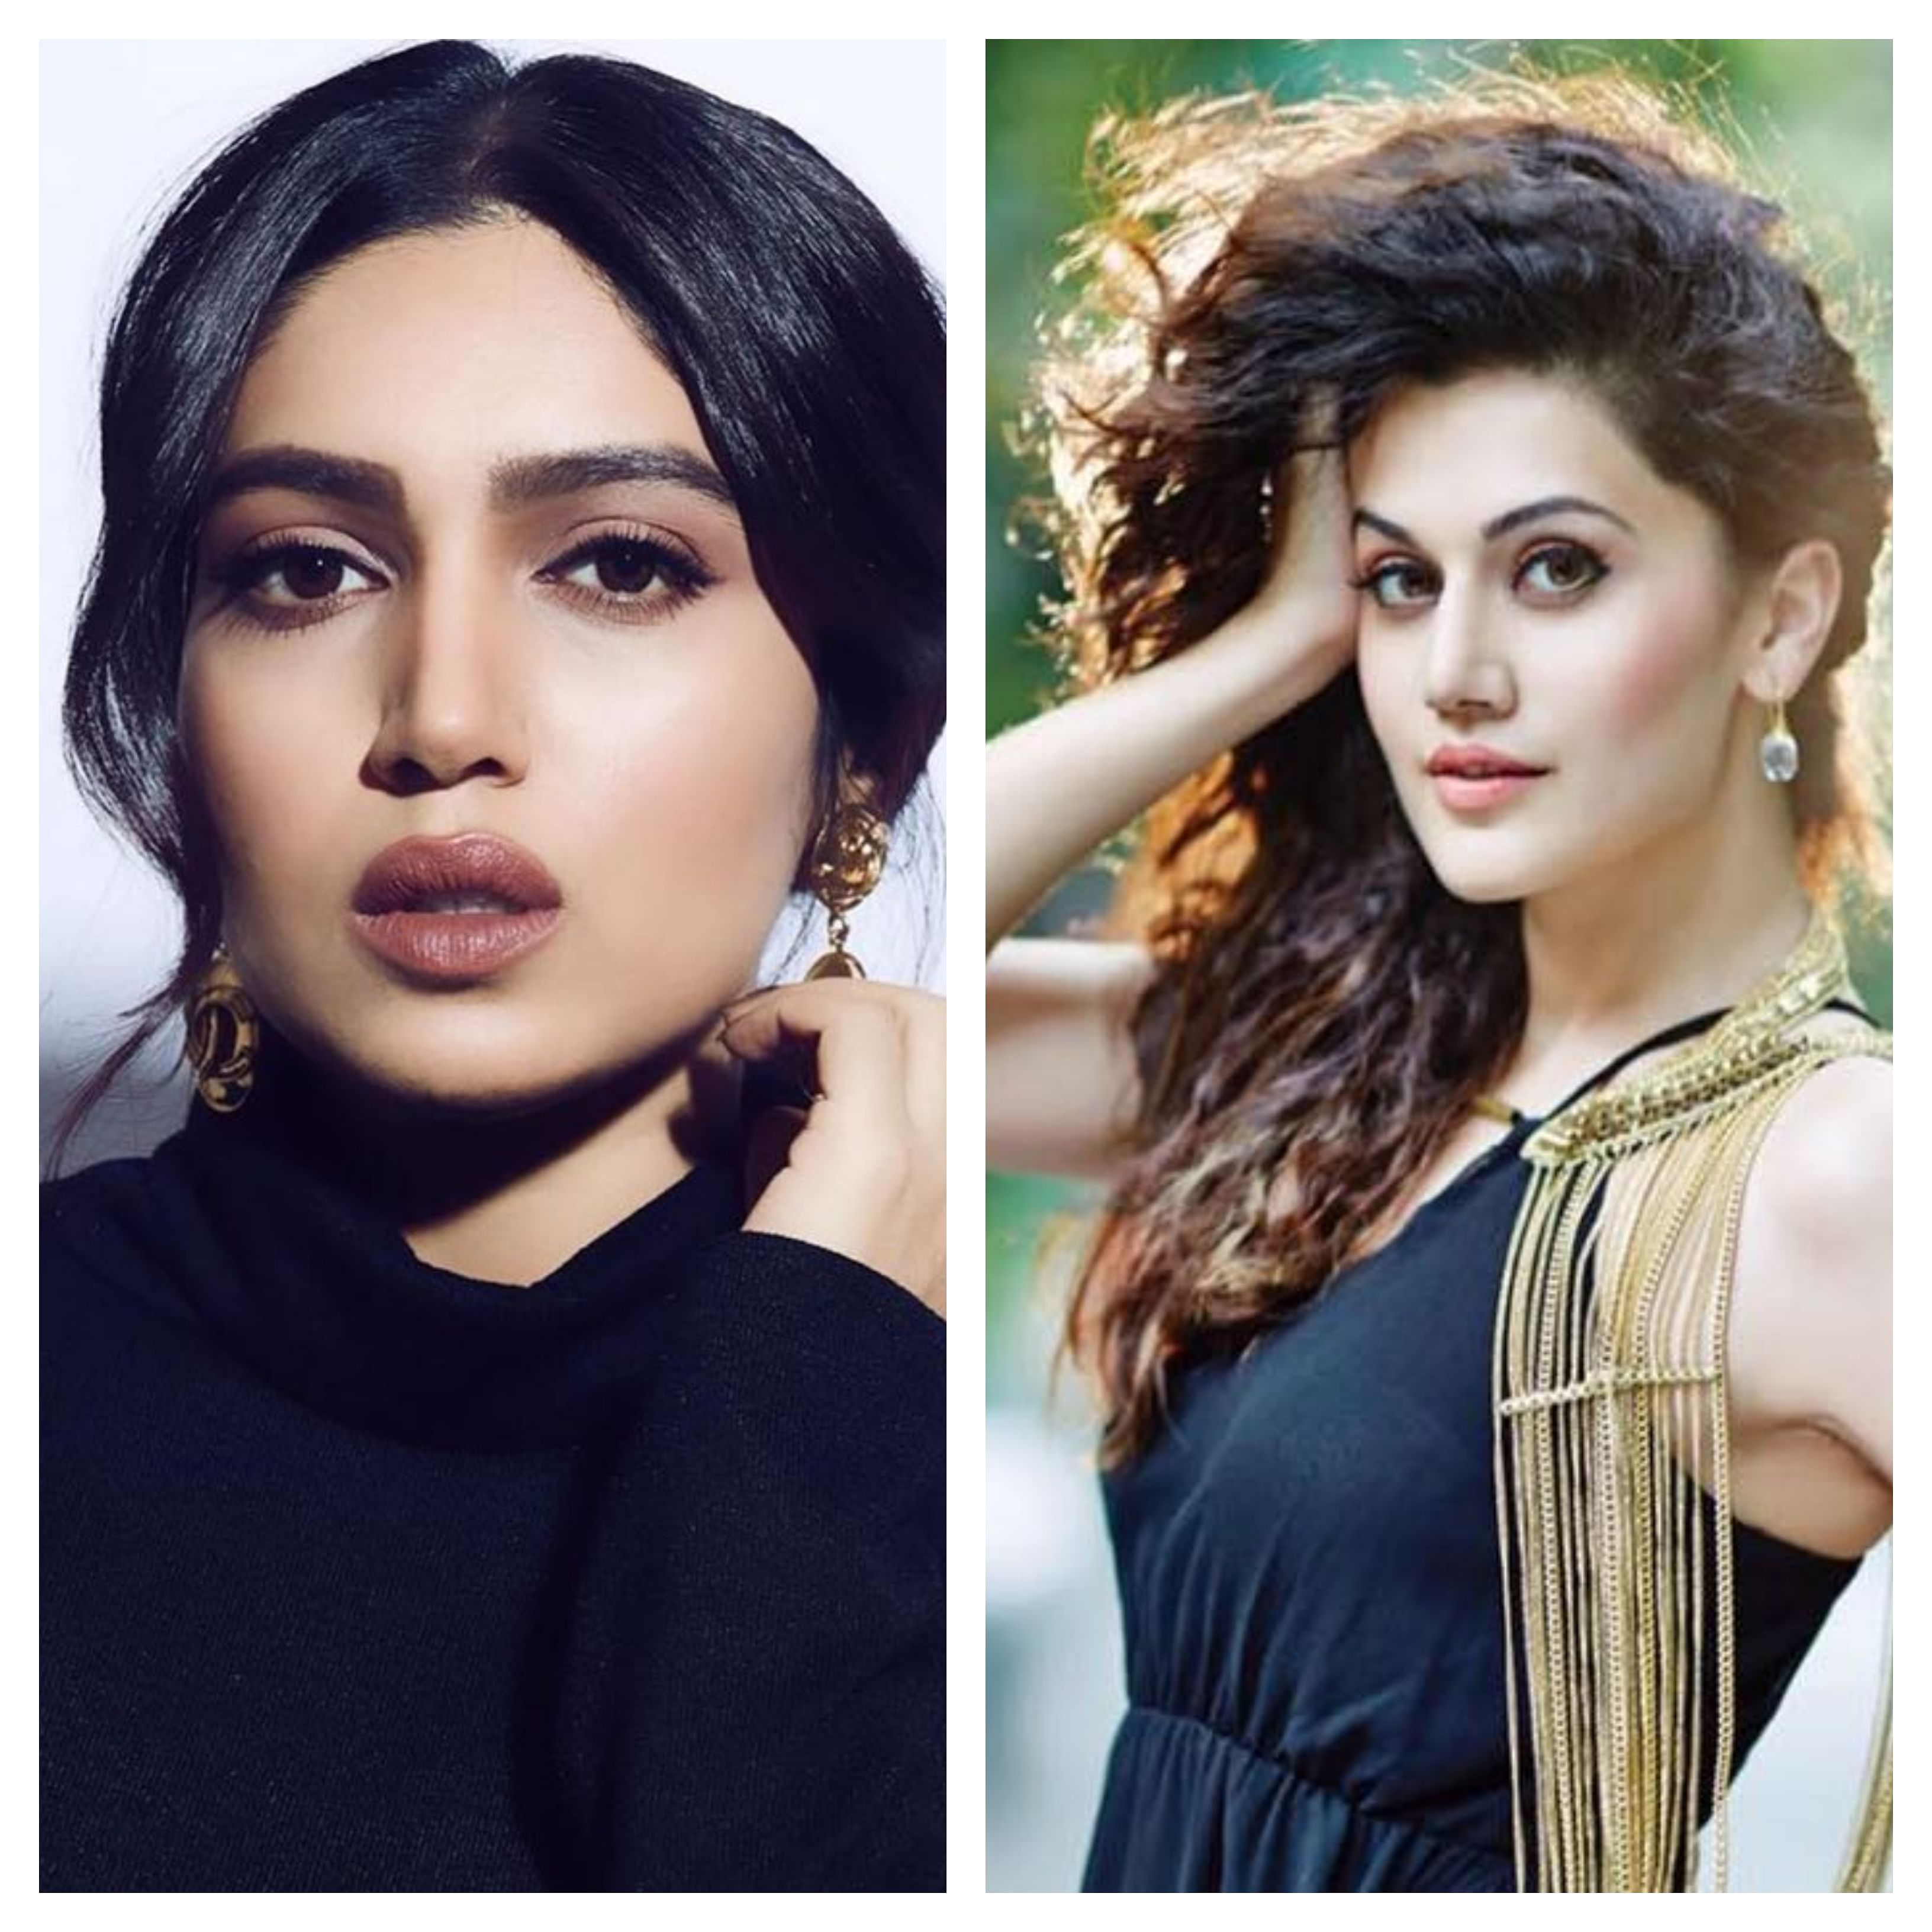 Bhumi and Taapsee were among the Bollywood stars who reacted to cyclone Amphan. (Credit: Facebook/TaapseePannu/BhumiPednekar